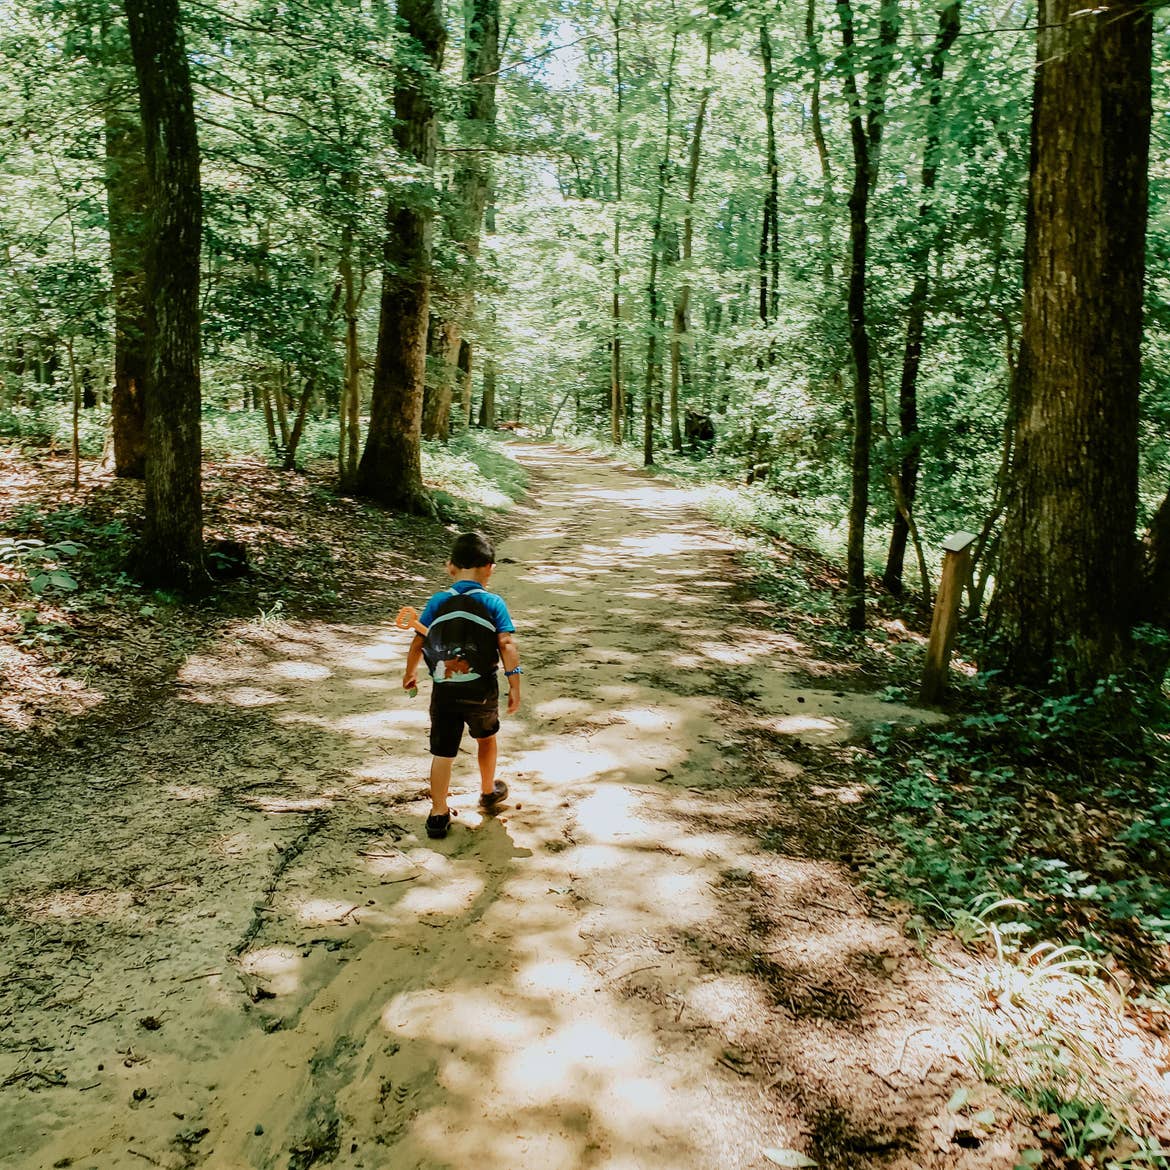 Angelica's son hiking through a wooded nature trail with his backpack on.